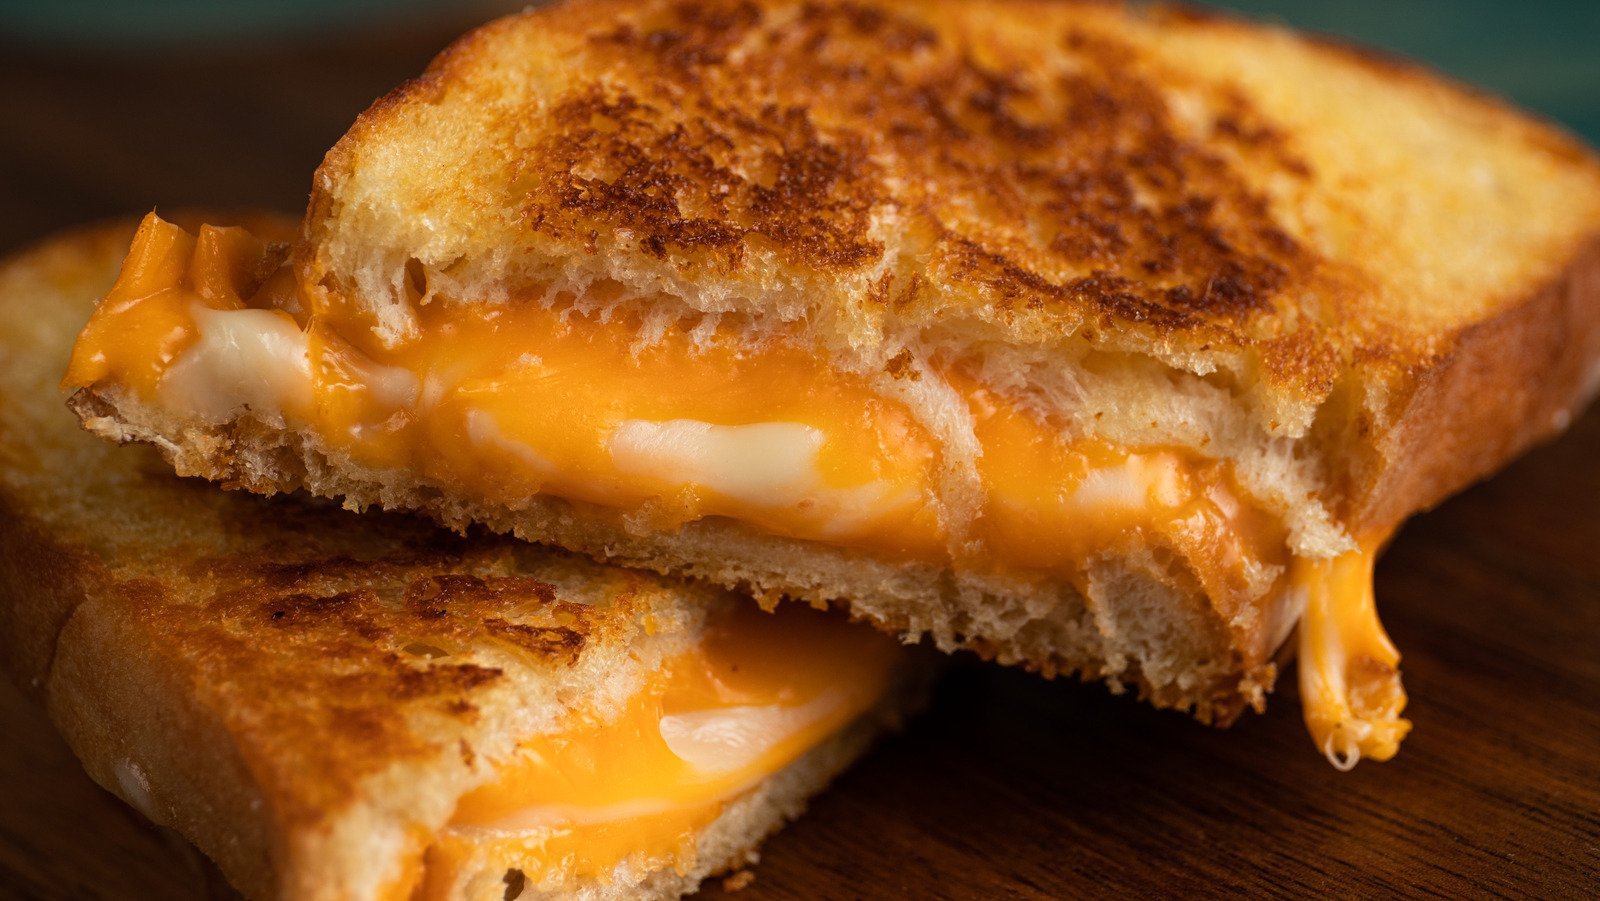 The Secret Ingredient For A Crispier Grilled Cheese